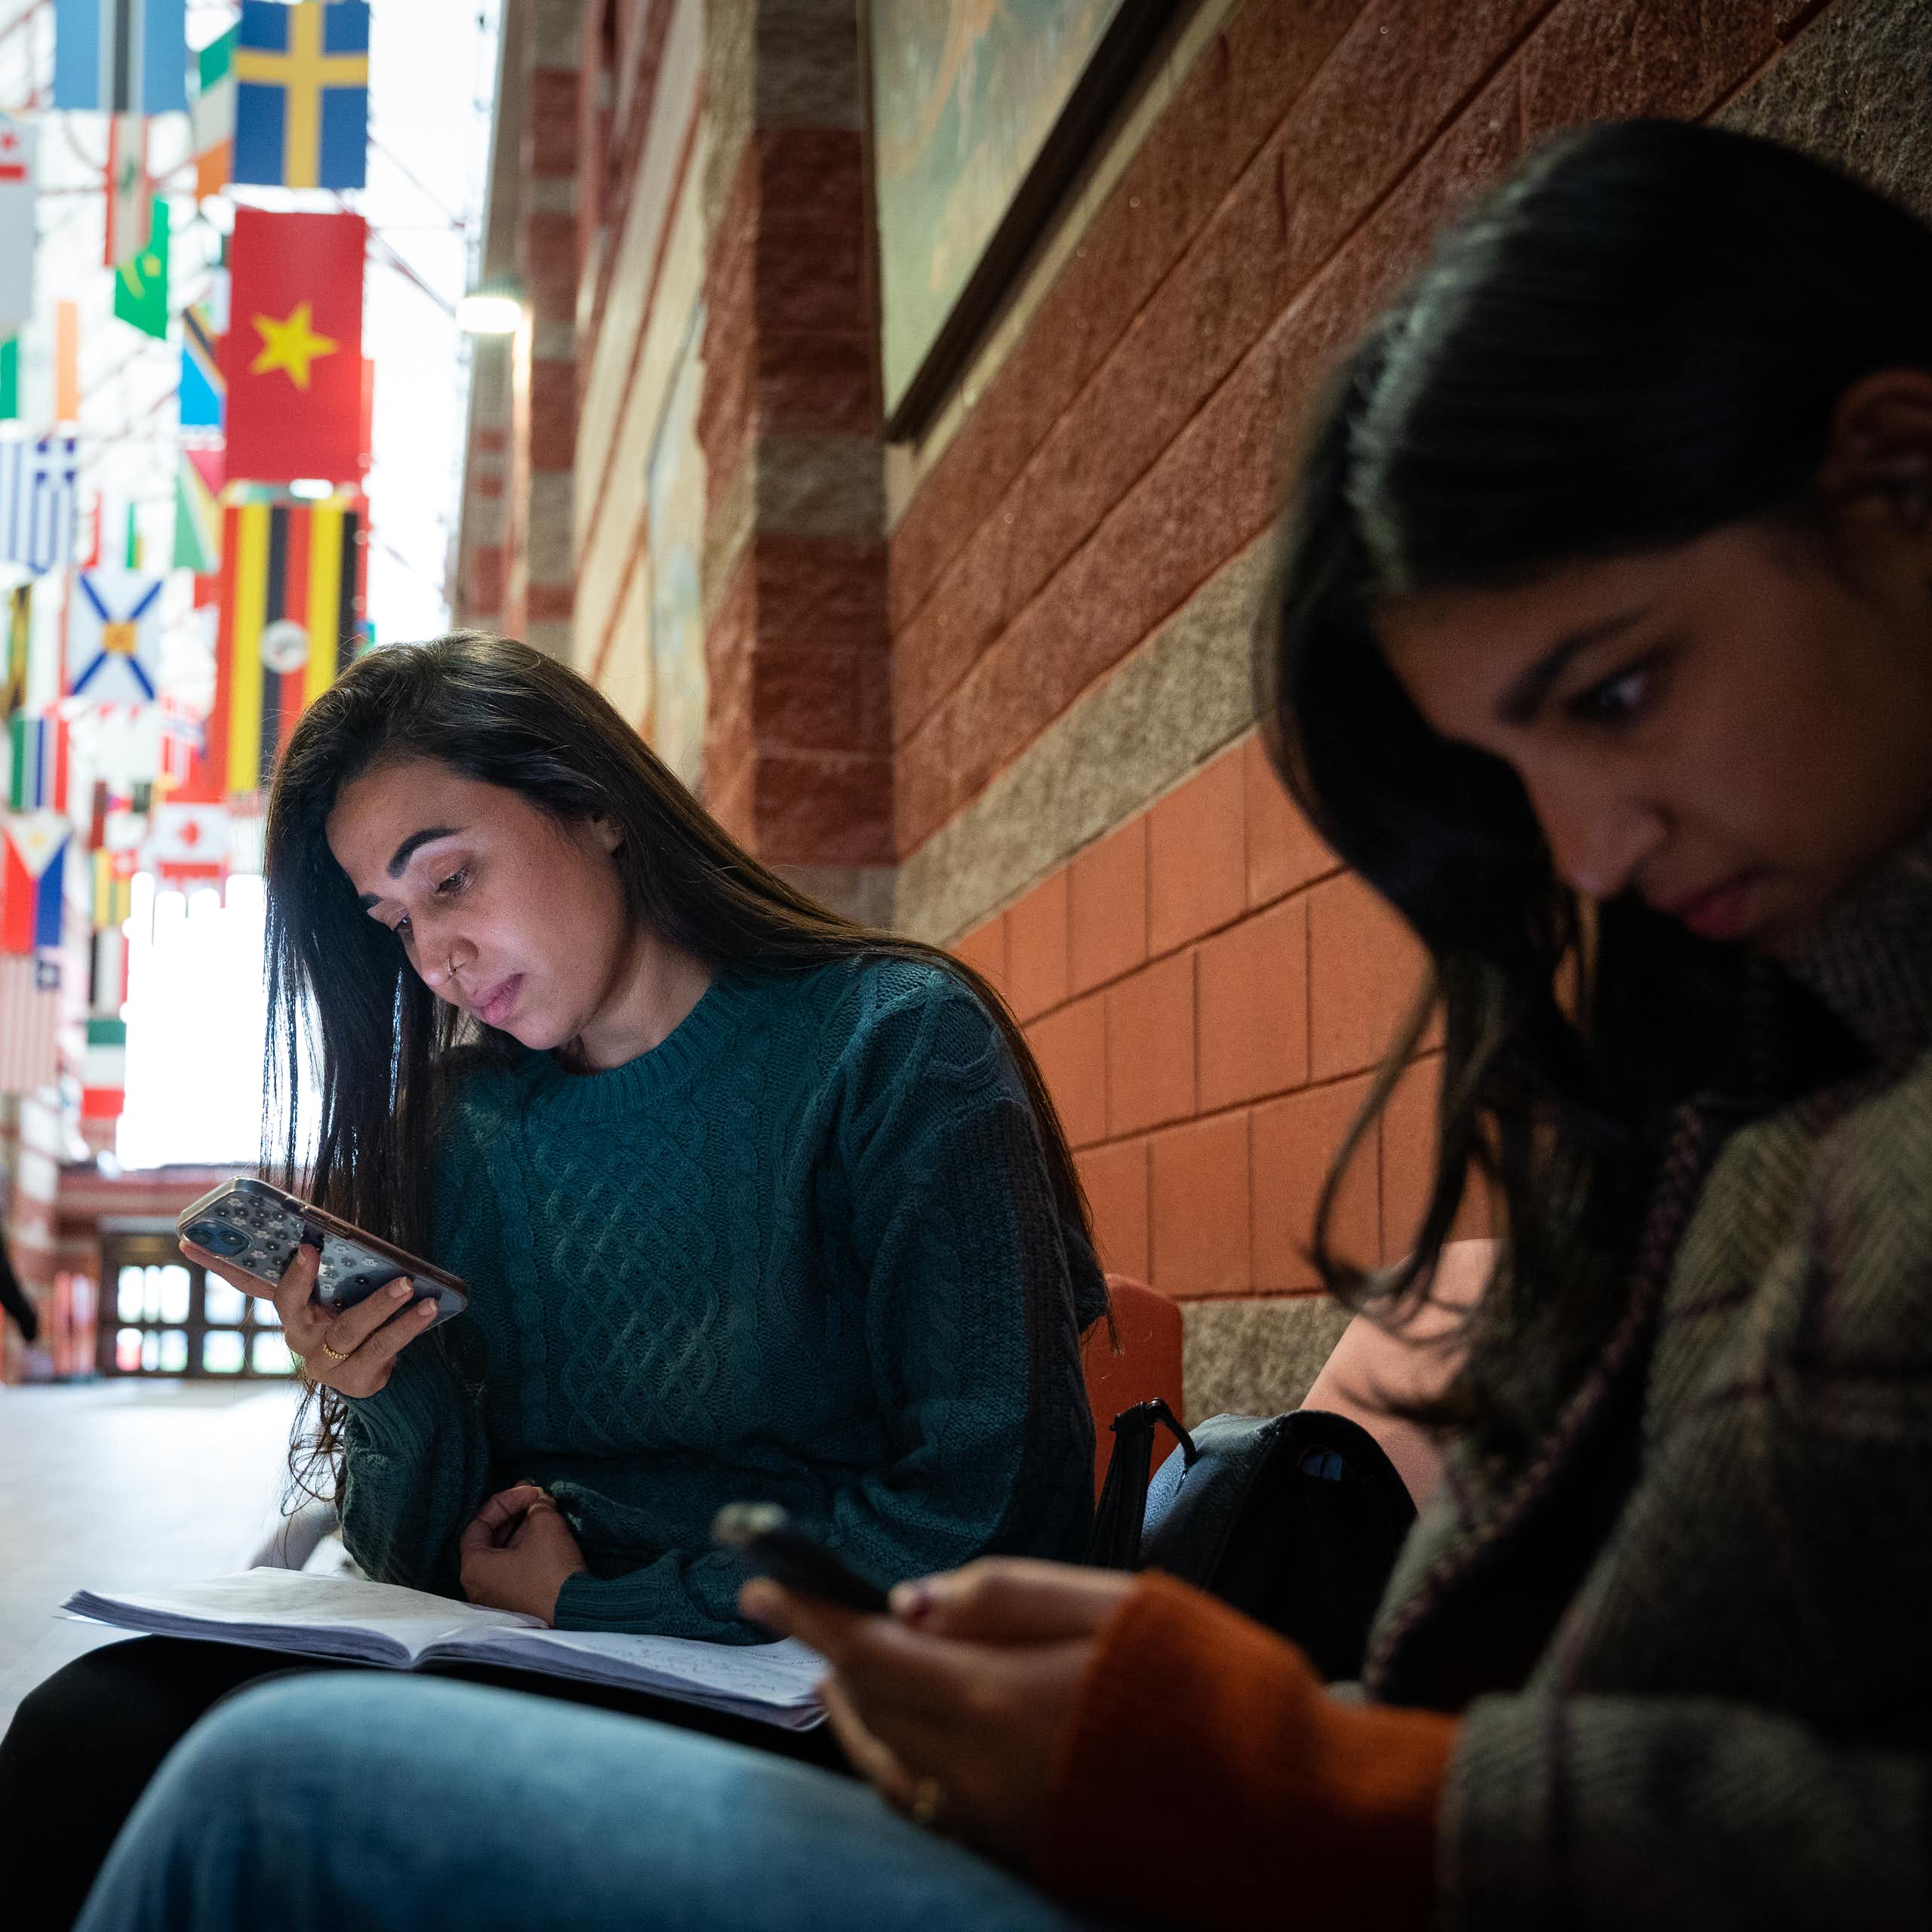 Two dark-haired girls look at their phones as they sit in a hall at a university. One has a notebook on her lap.